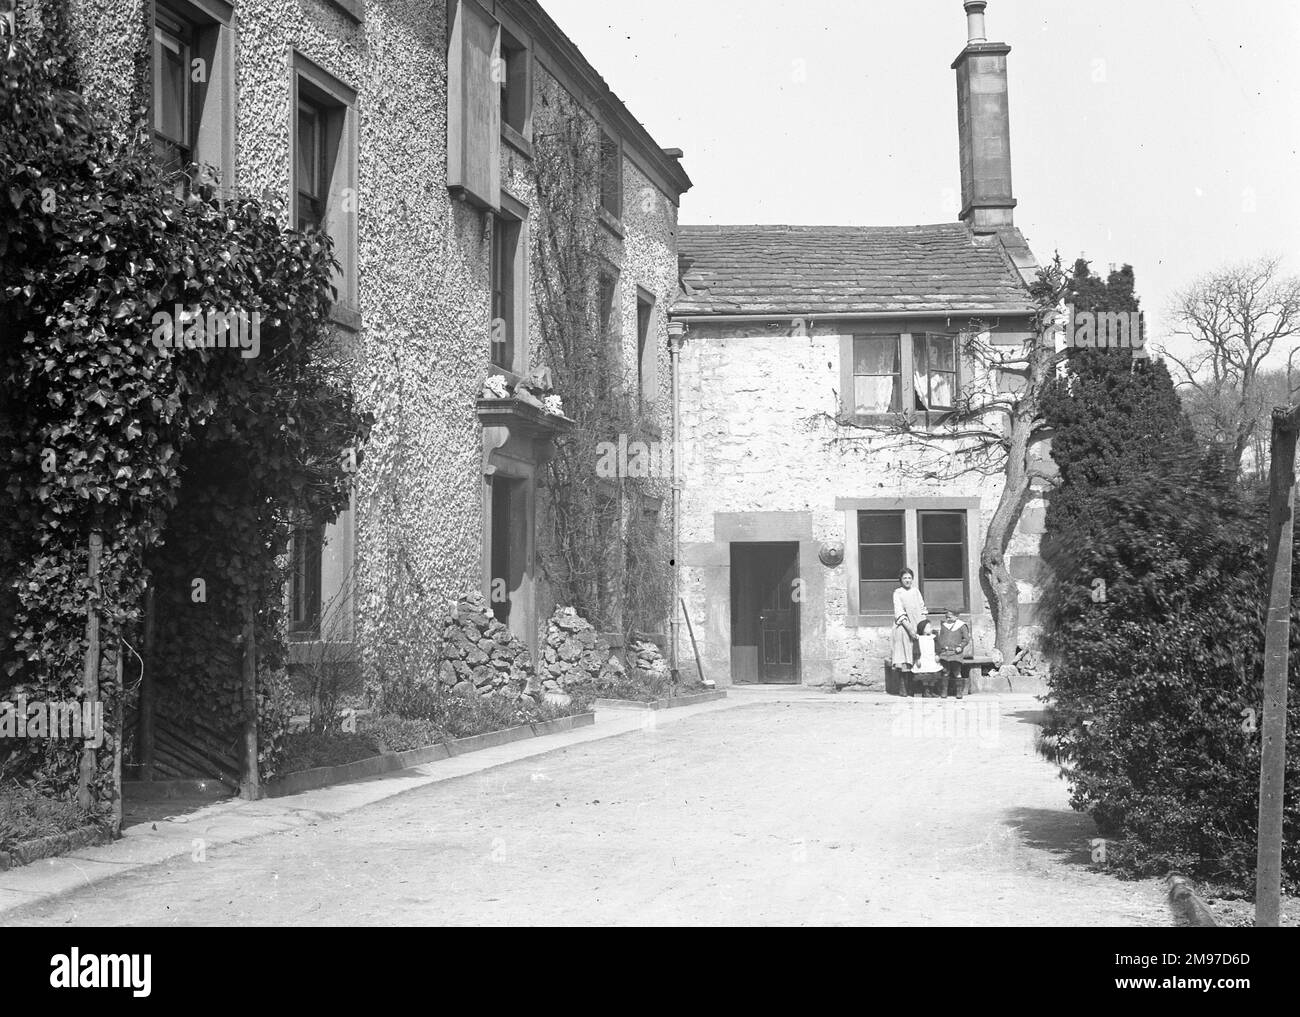 Labelled as the Eyam Ball Hotel, this shows the street approaching the dwelling mentioned  - it also notes the piles of rock by the front door which may have been in place for use as a flood defence. Stock Photo